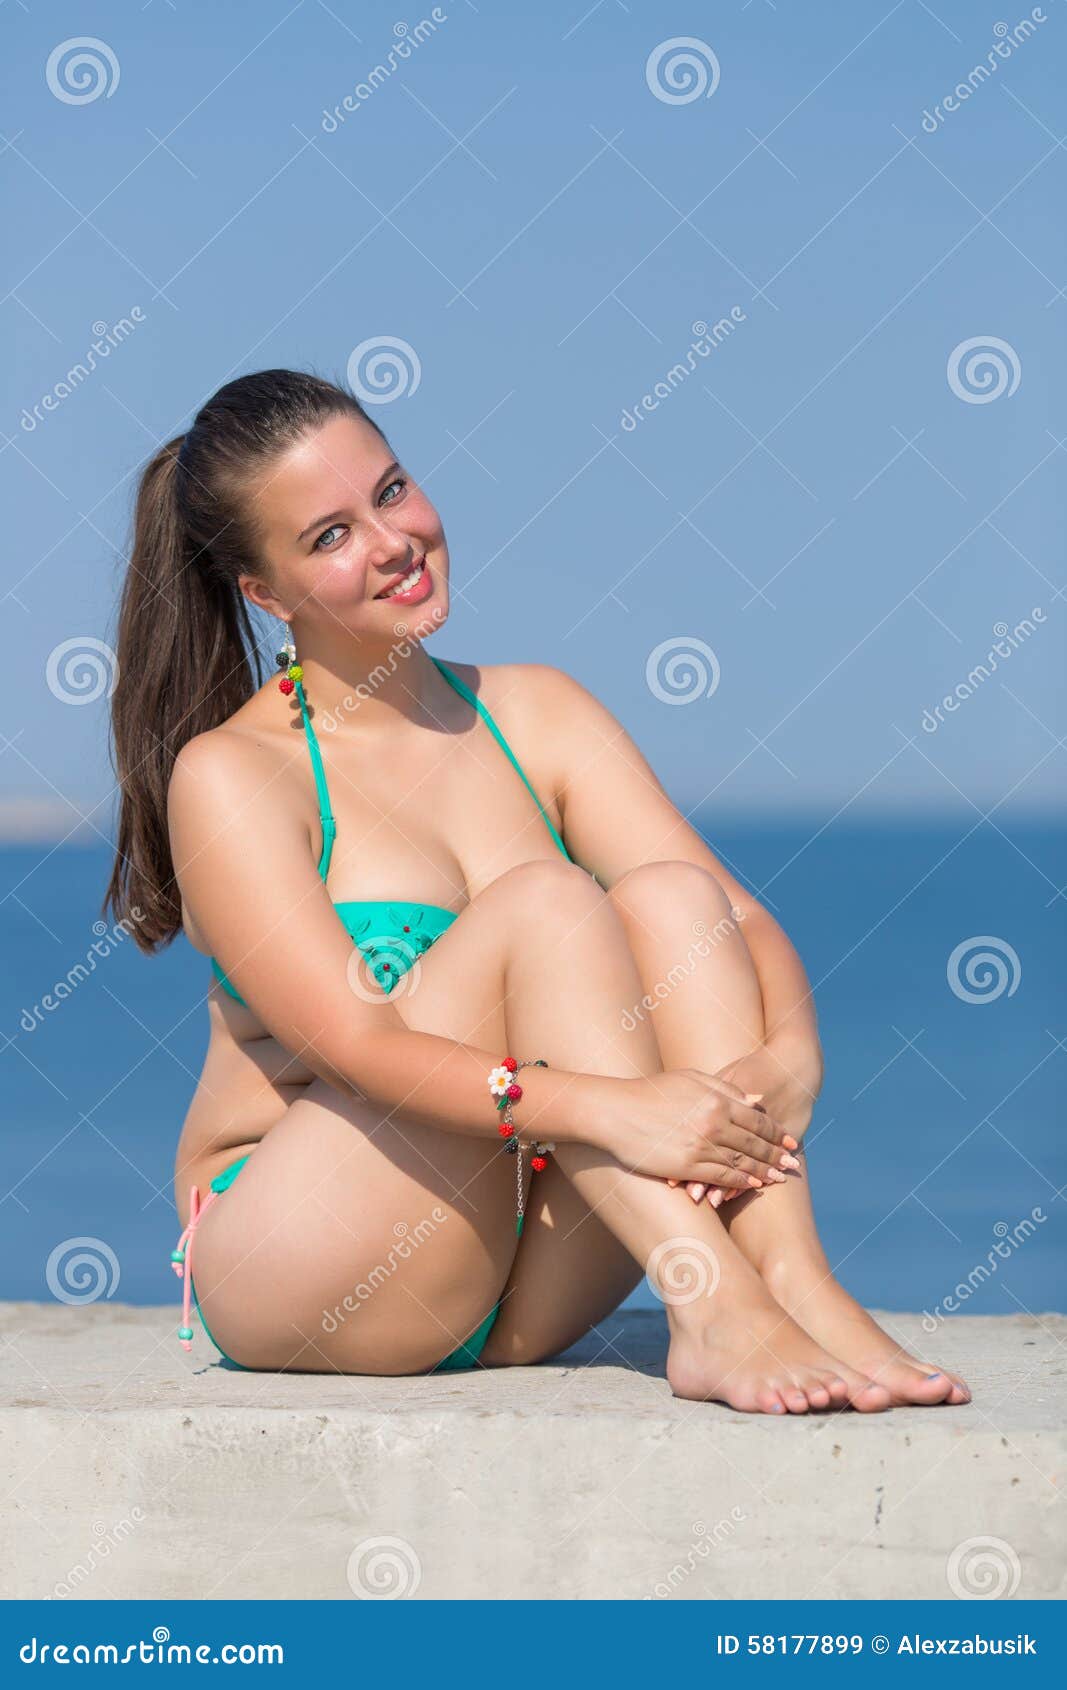 Beach Glamour Photography - Girl at the sea stock image. Image of camera, beach, adult - 58177899